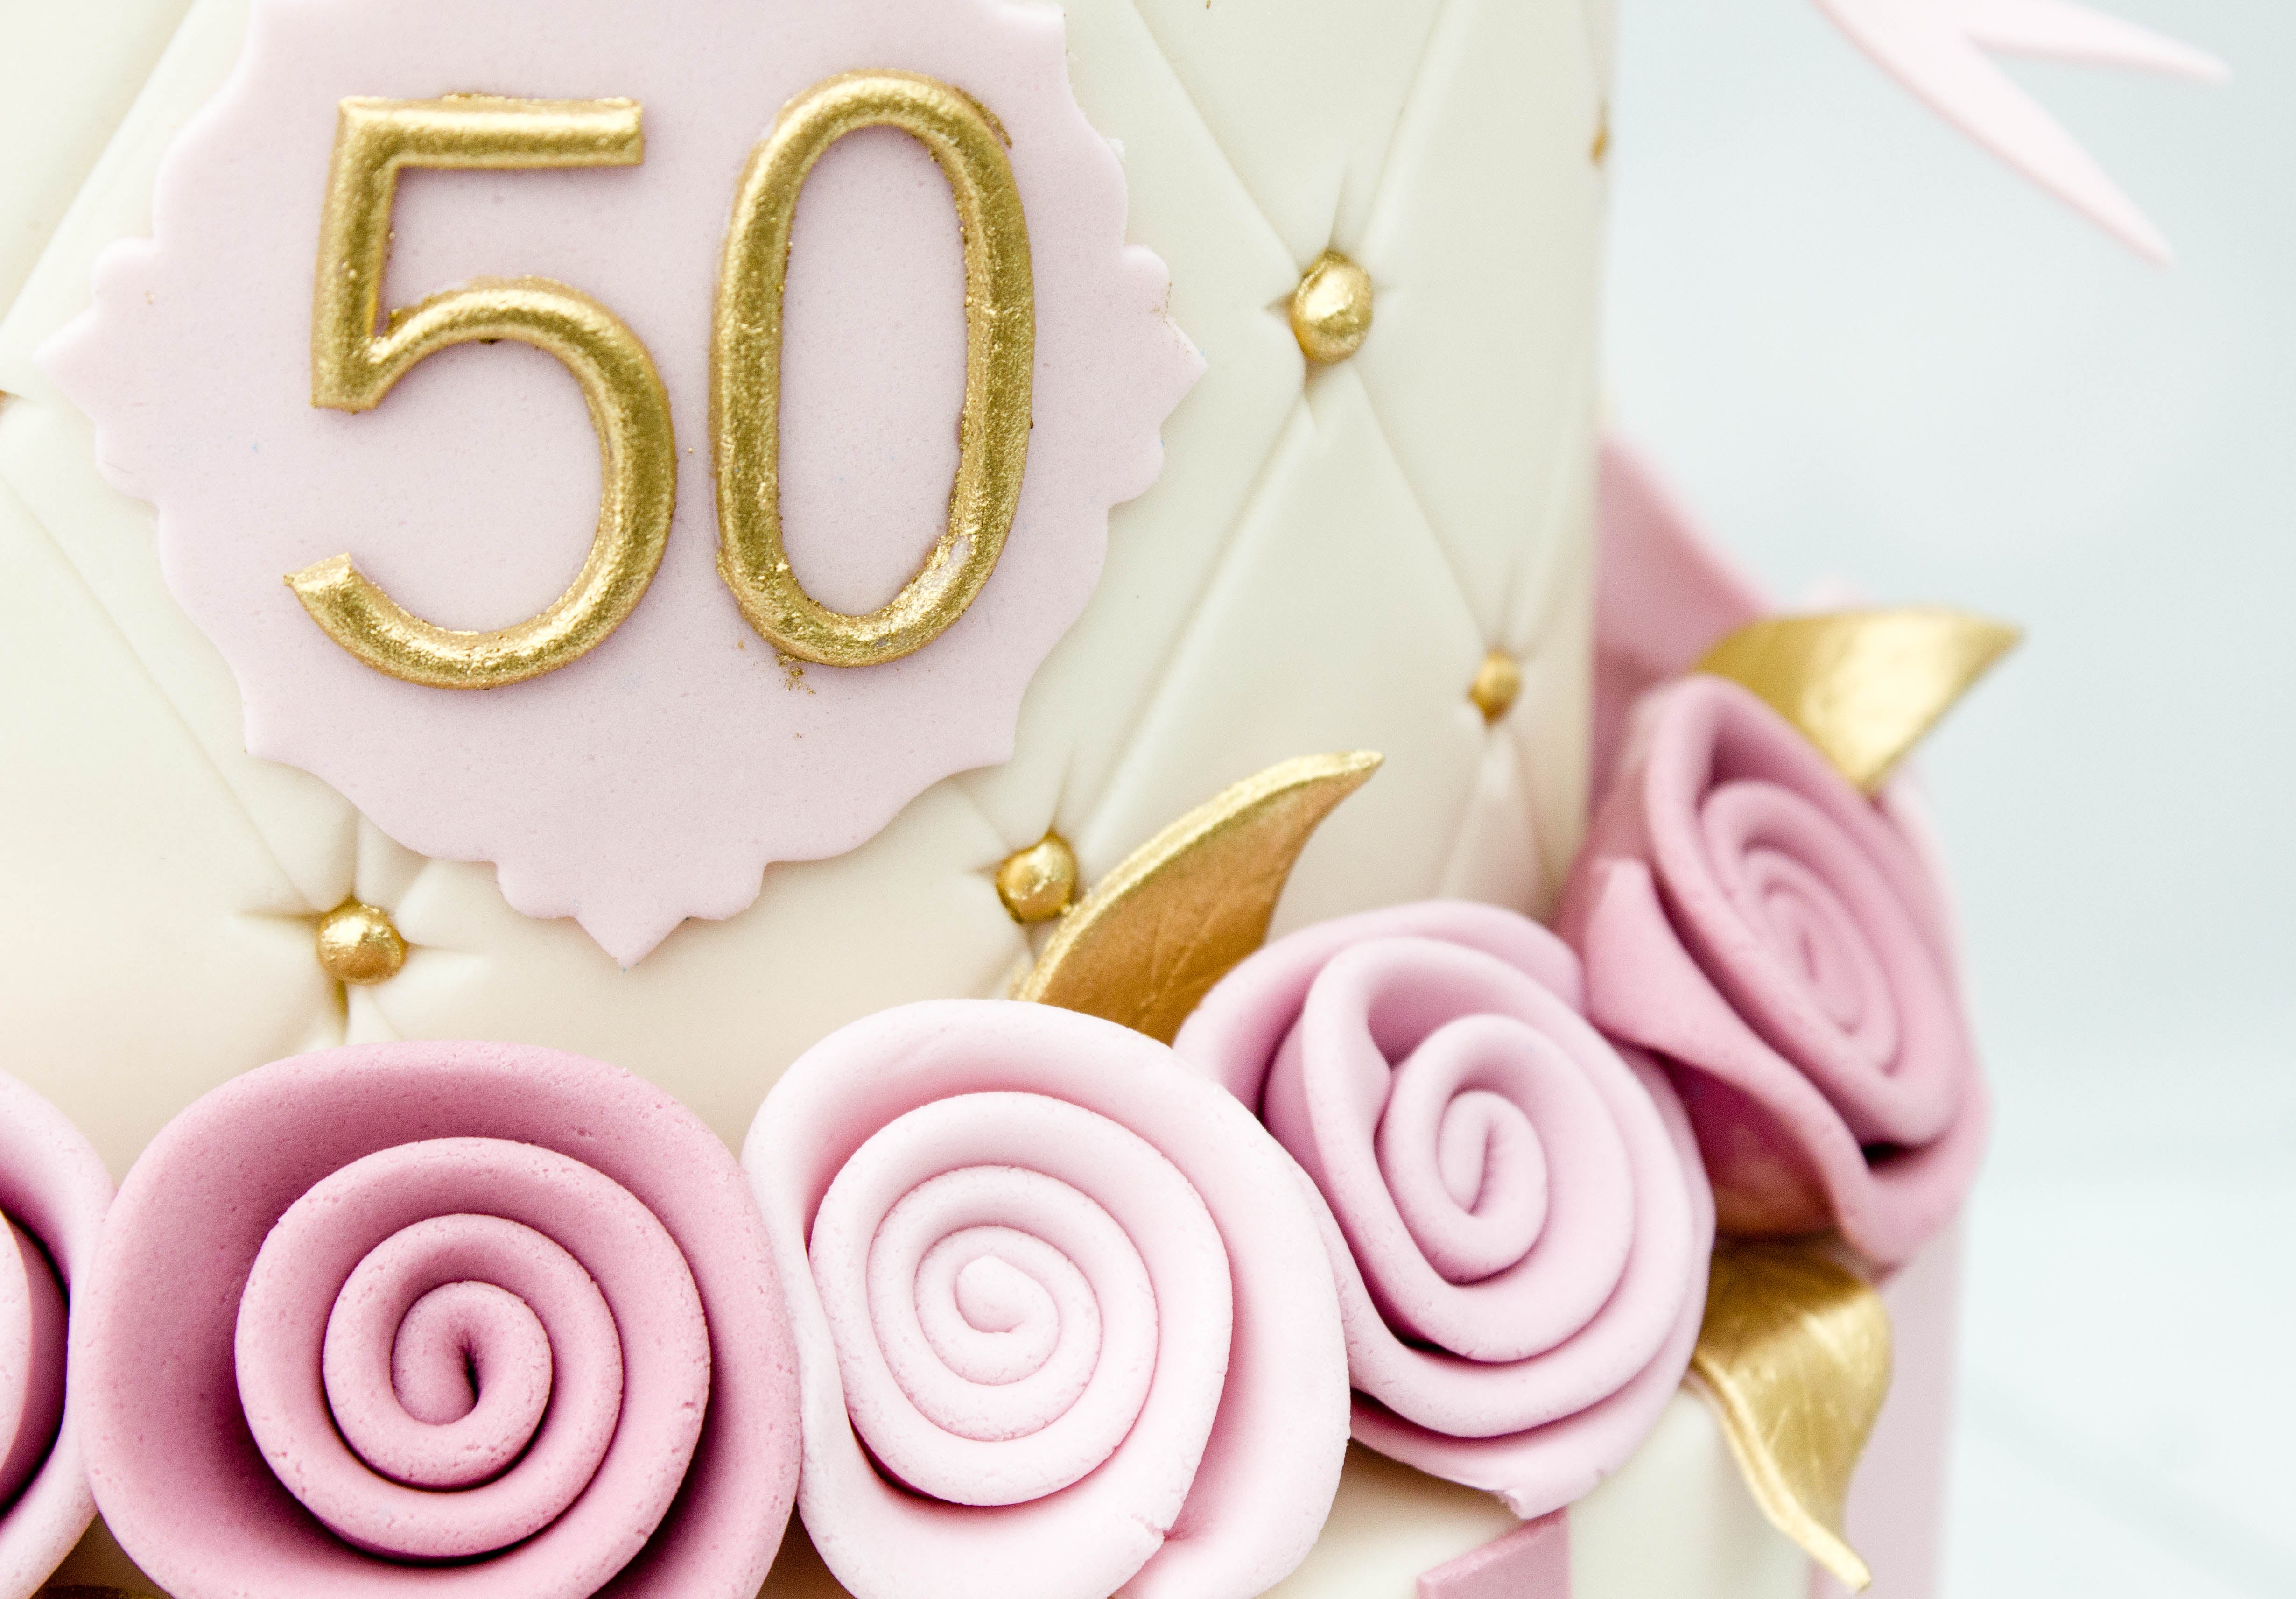 100 Best Happy 50th Birthday Wishes - Parade